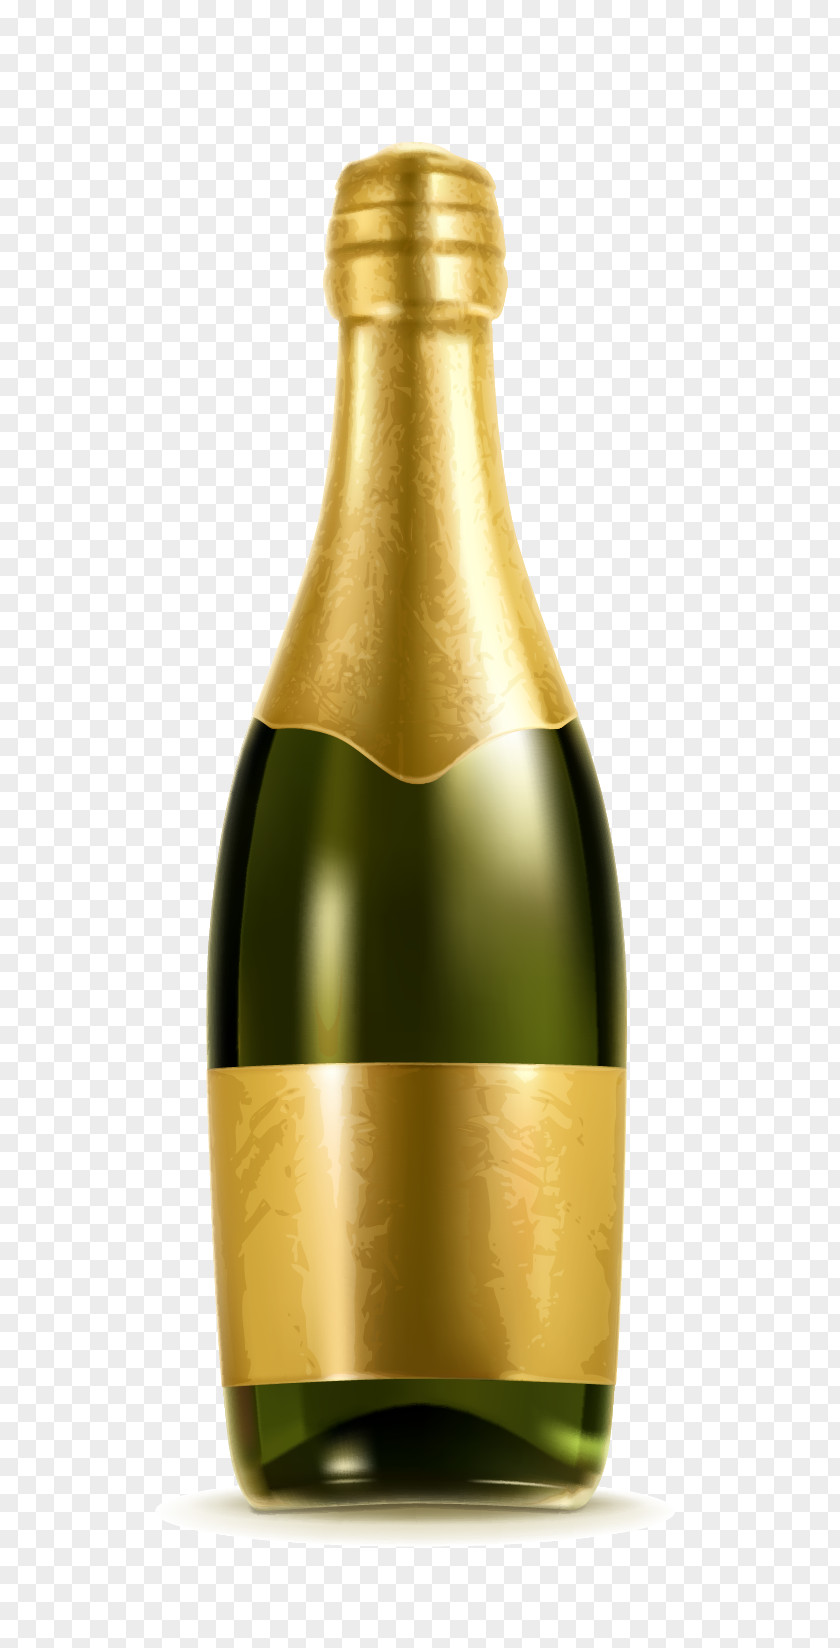 Textured Material Vector Bottle Champagne Alcoholic Beverage Illustration PNG